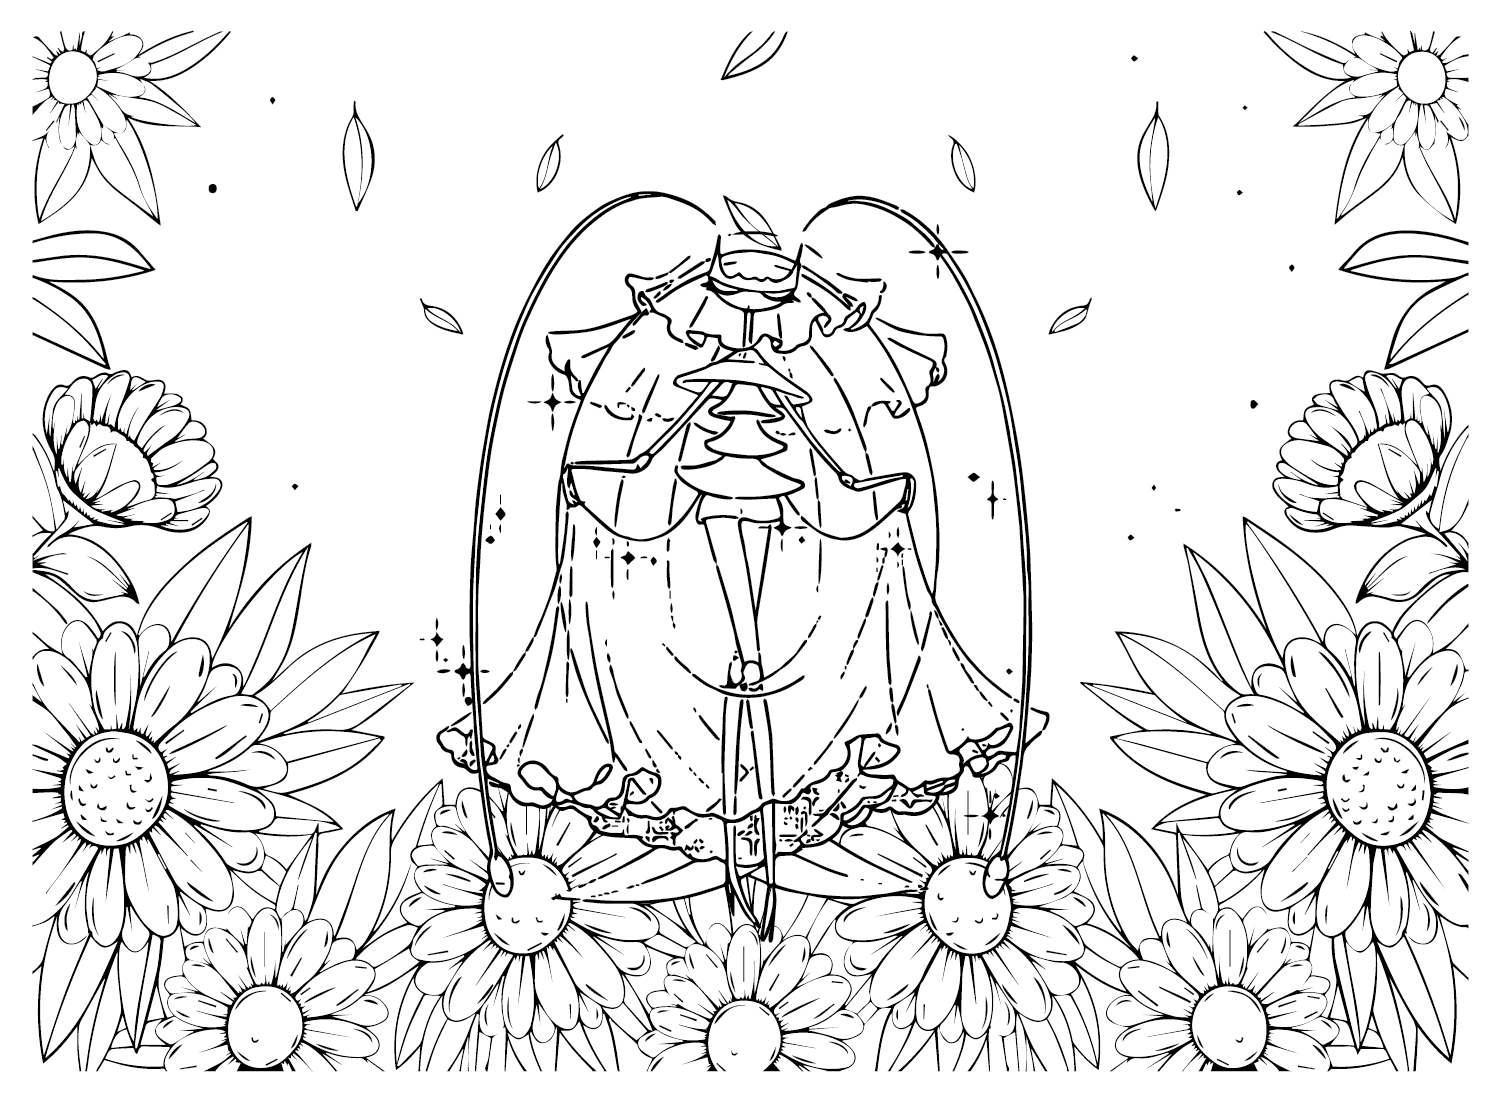 Pheromosa can Color Coloring Page